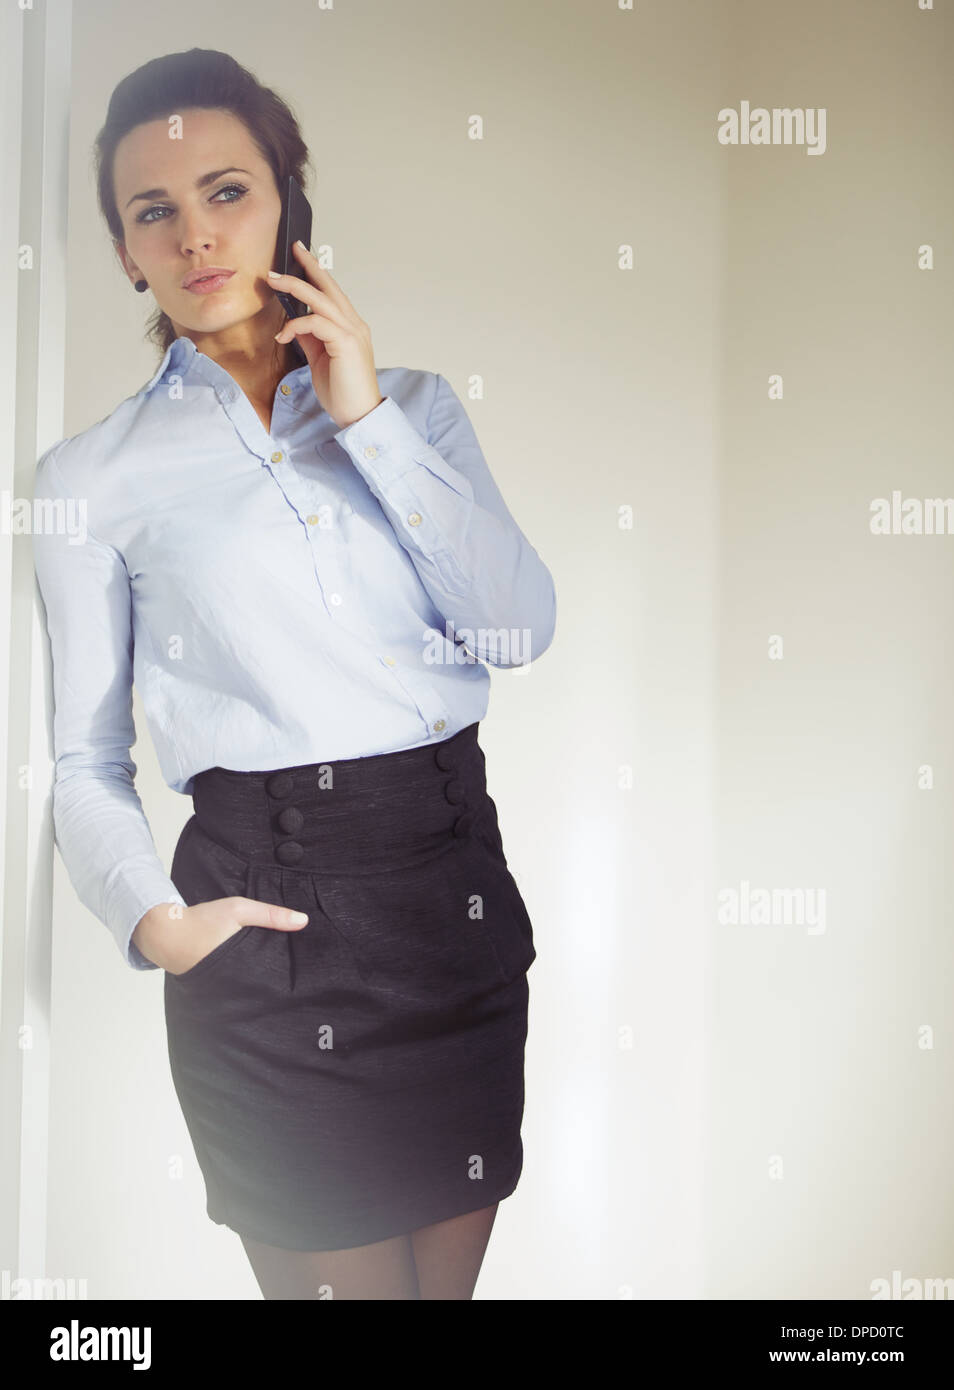 Elegant businesswoman dressed in skirt and shirt talking business on the phone. Caucasian woman in the 20s Stock Photo